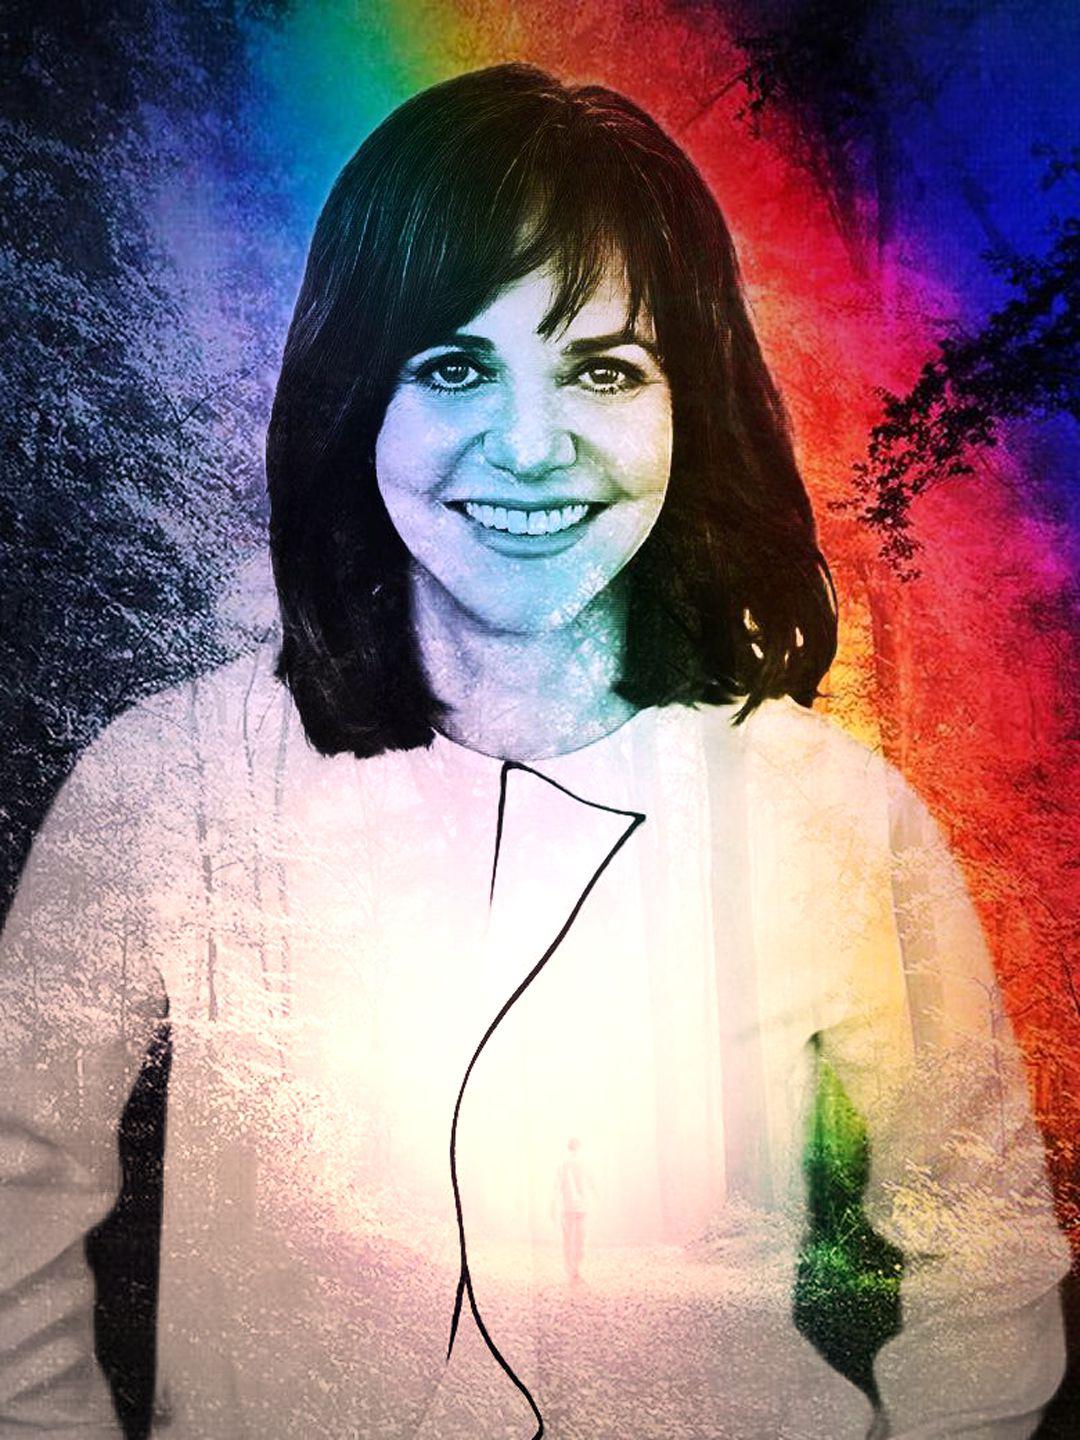 Amanda Tapping Porn Pussy - Sally Margaret Field - Celeb ART - Beautiful Artworks of Celebrities,  Footballers, Politicians and Famous People in World | OpenSea